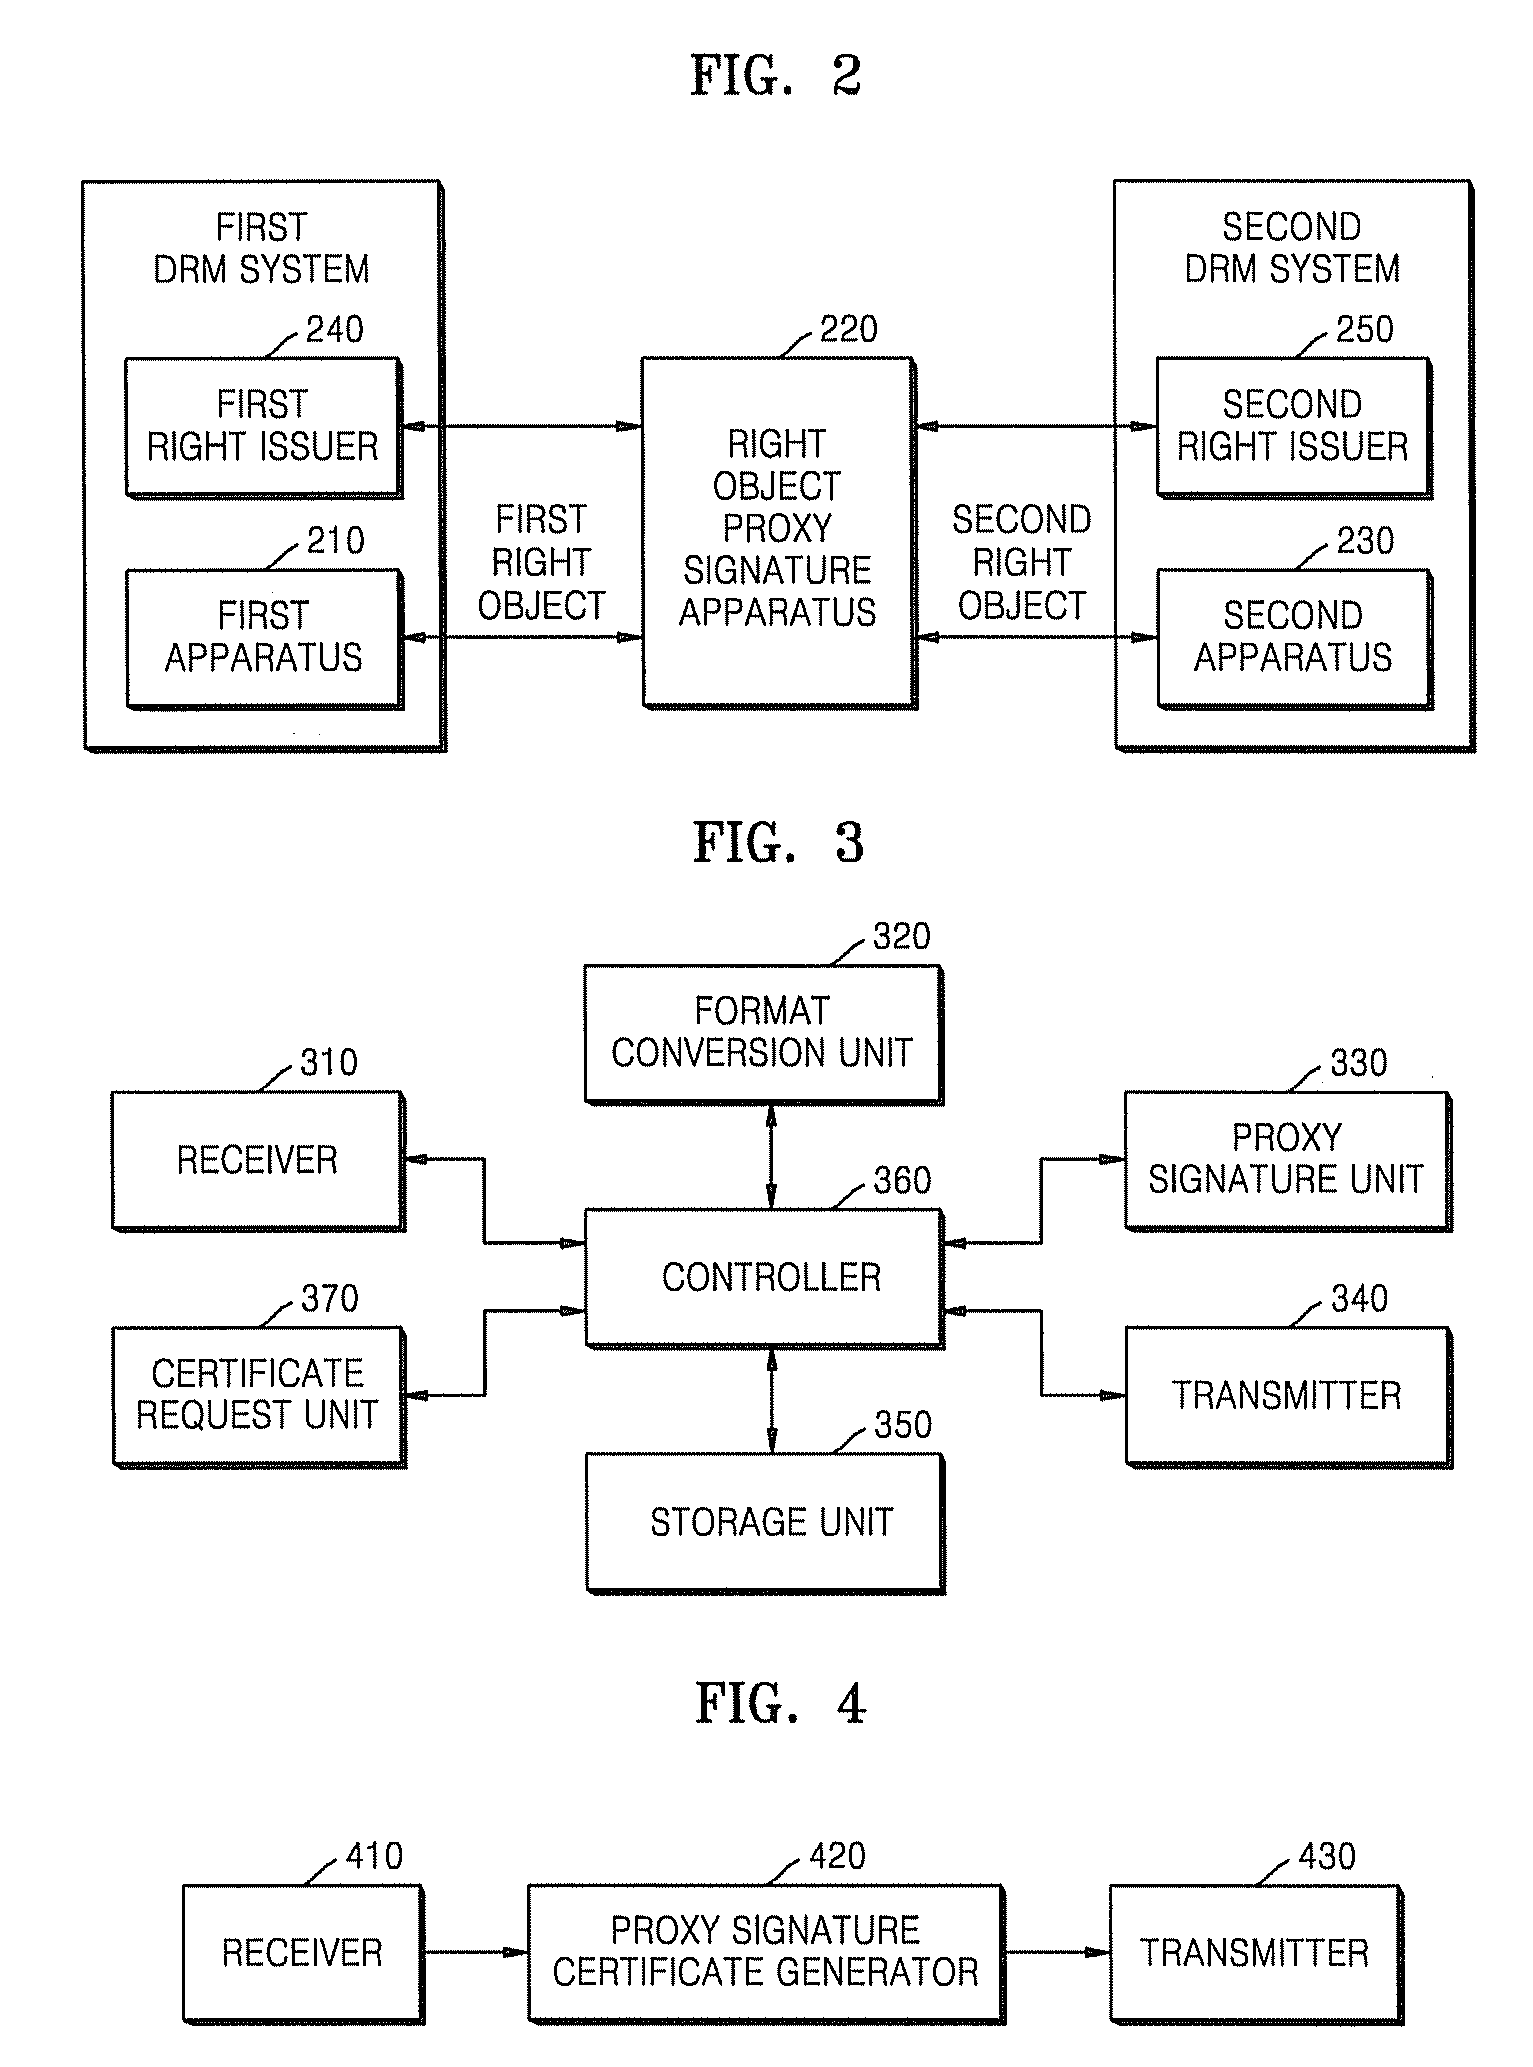 Method and apparatus for generating proxy-signature on right object and issuing proxy signature certificate